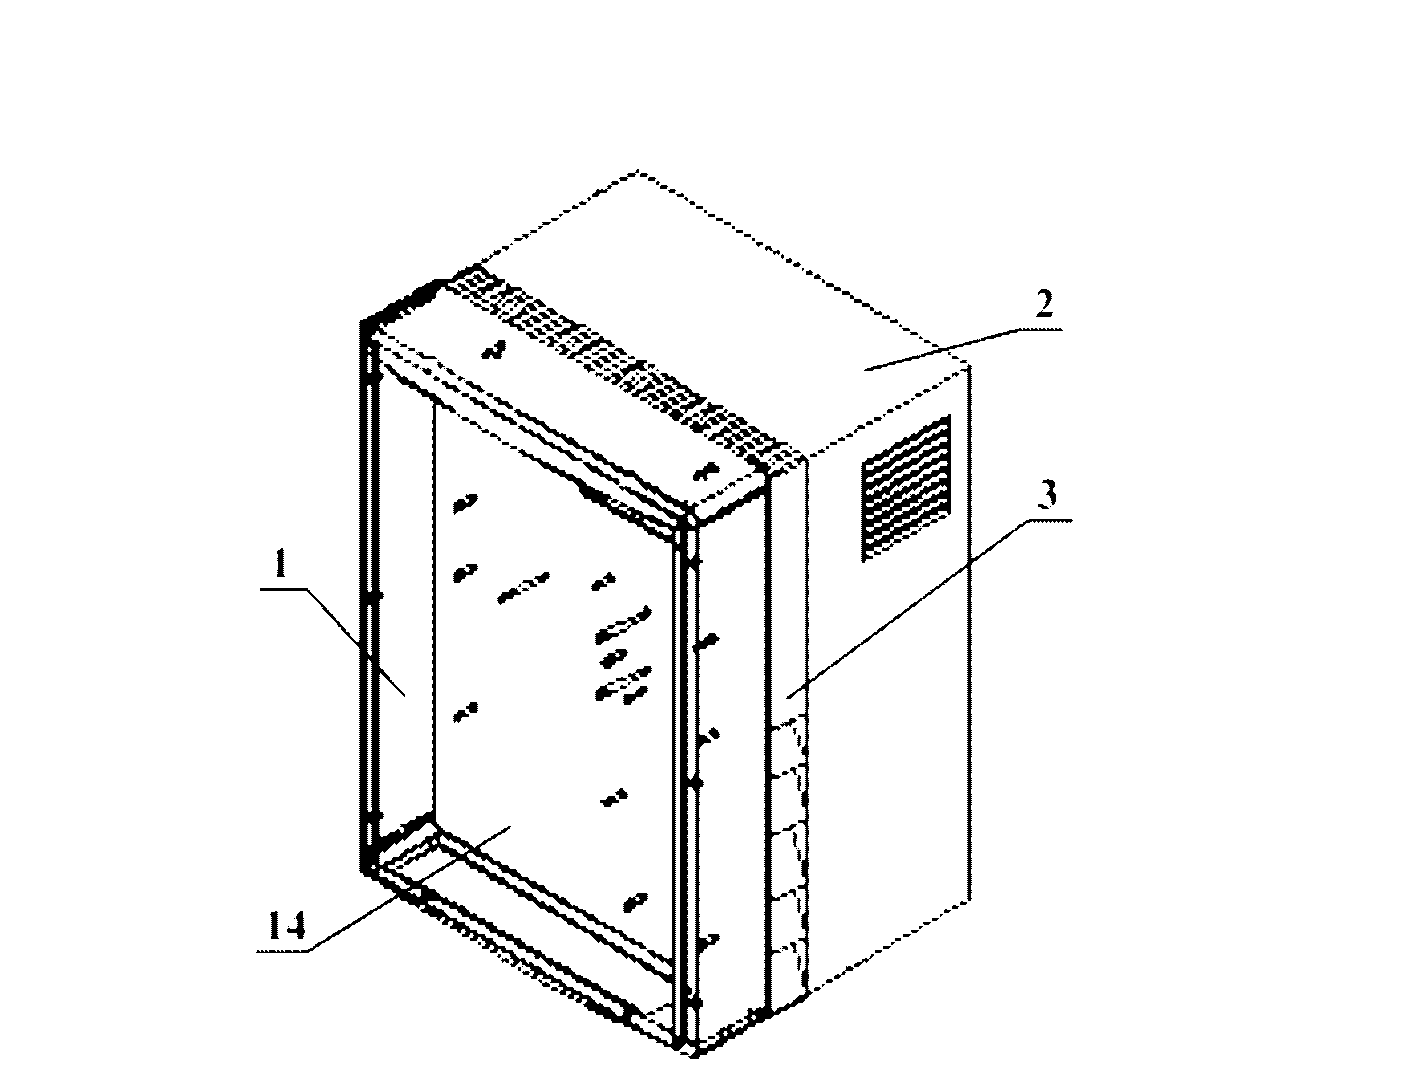 Cooling structure and cooking method of photovoltaic (PV) inverter